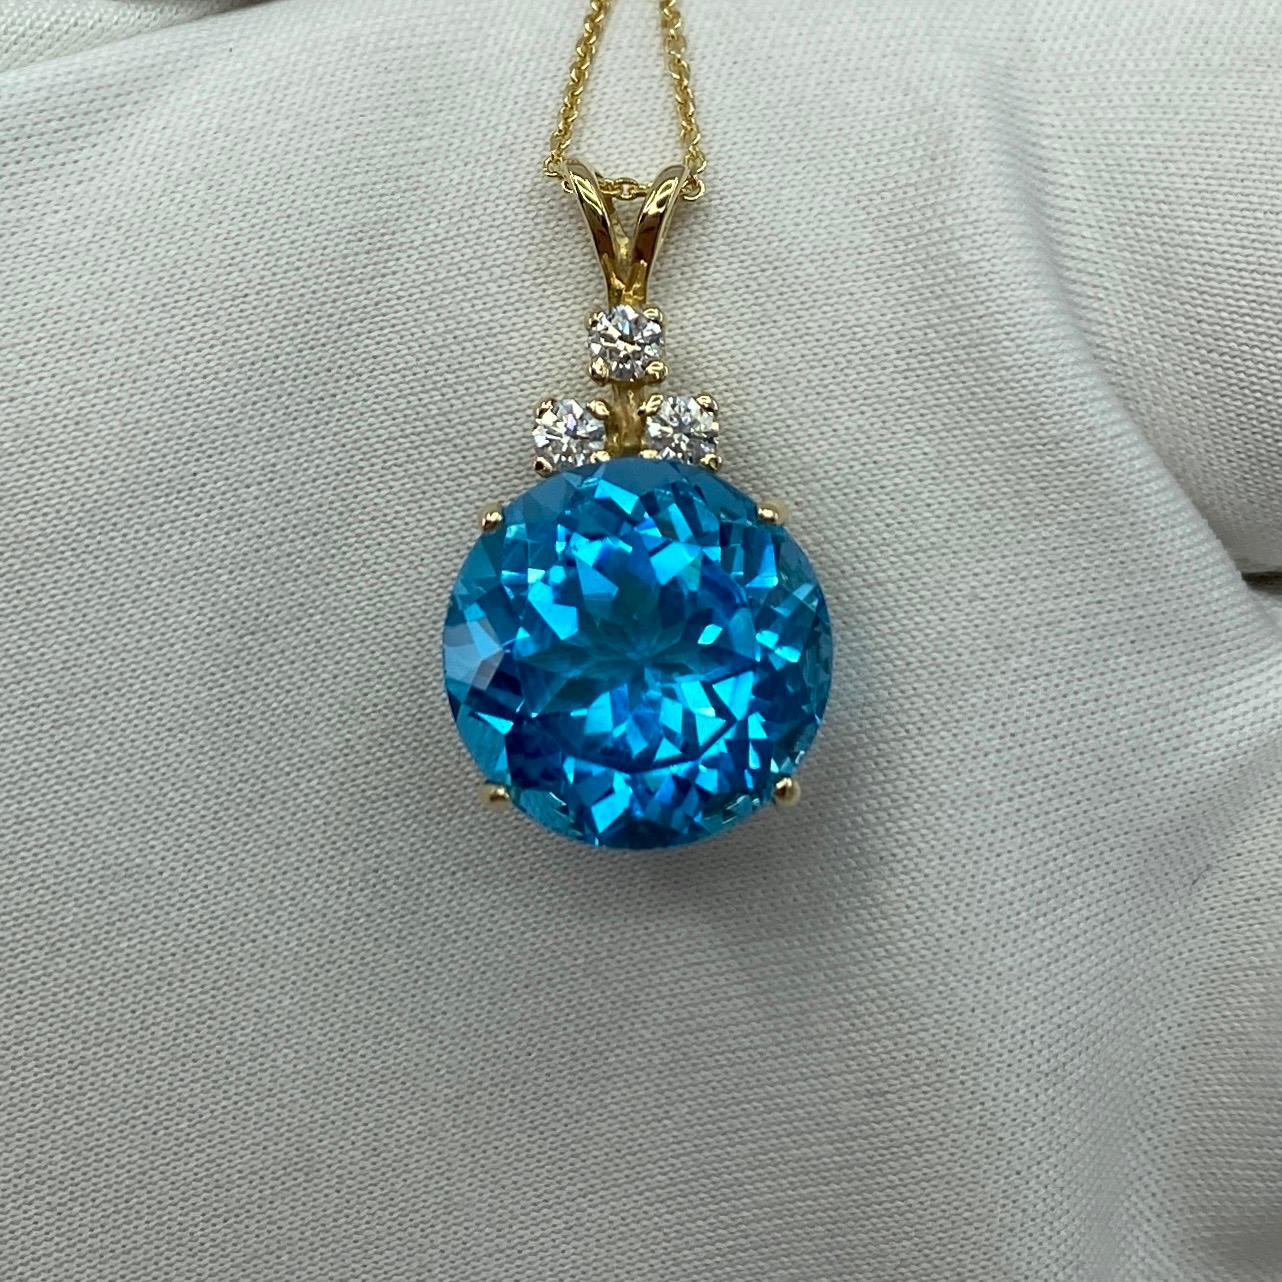 Swiss Blue Topaz & Diamond Yellow Gold Pendant Necklace.

Beautiful 10 carat natural Swiss blue topaz set in a fine 14k yellow gold pendant. Accented with x3 colourless diamonds 2.5mm.

Stunning 13mm blue topaz with a vivid Swiss blue colour and